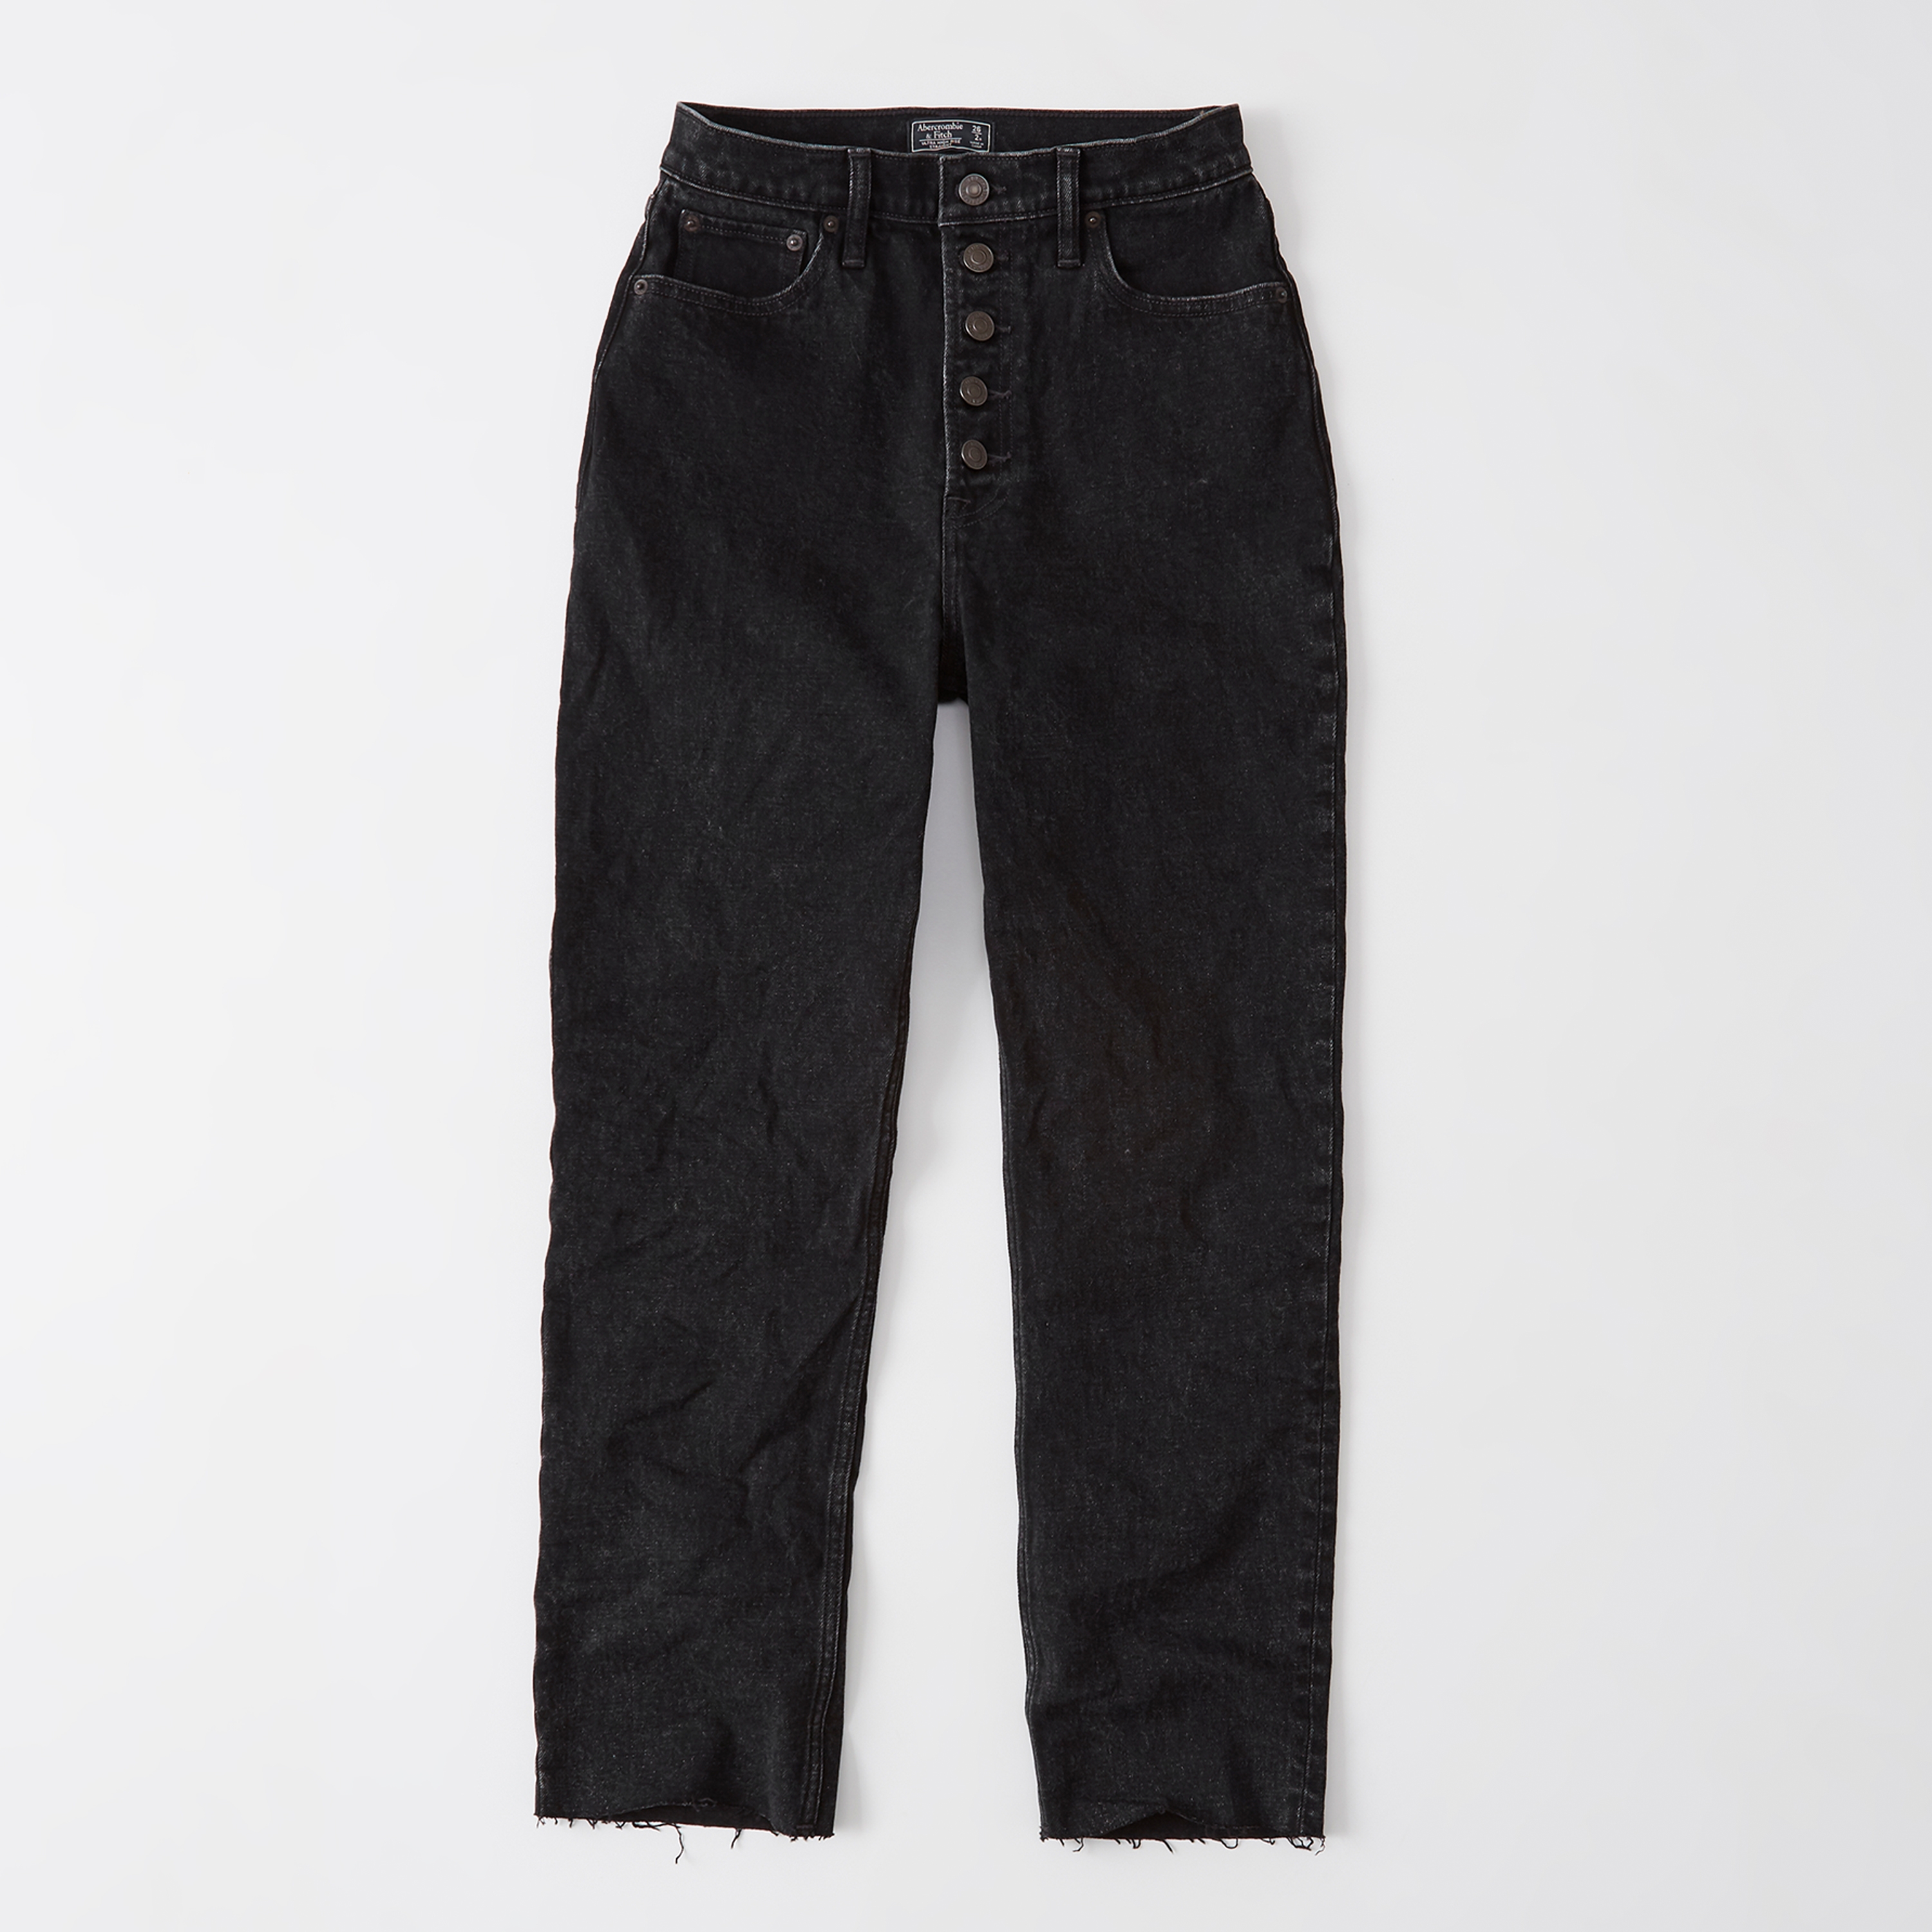 abercrombie and fitch button fly jeans